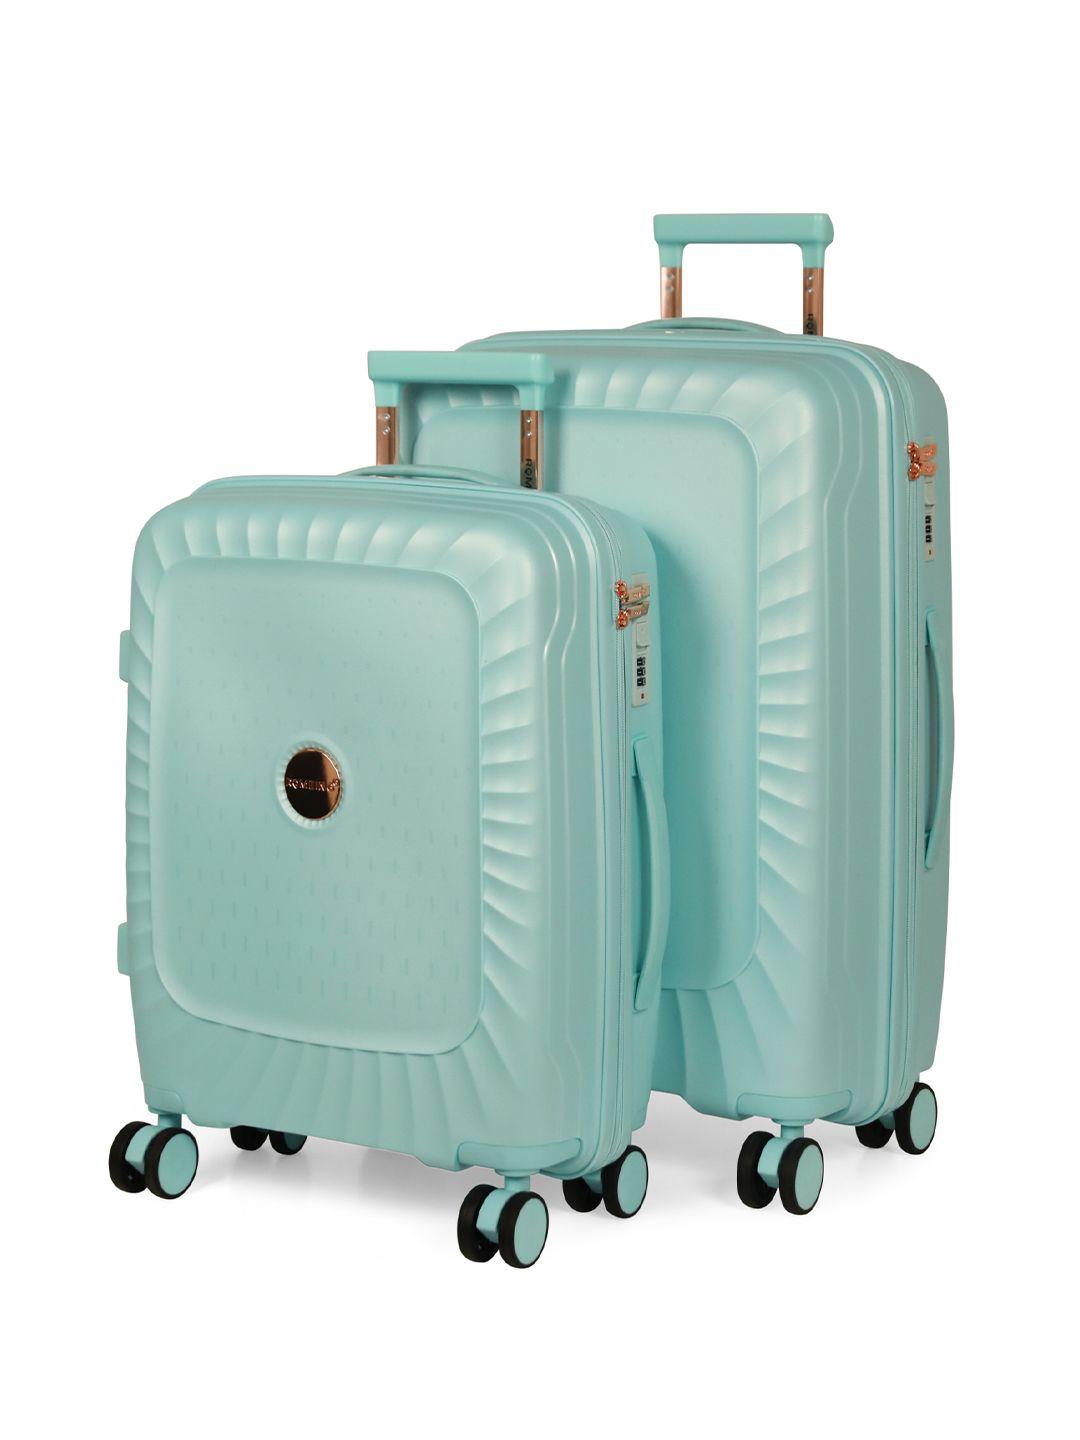 romeing sicily set of 2 sicily textured hard-sided trolley bags